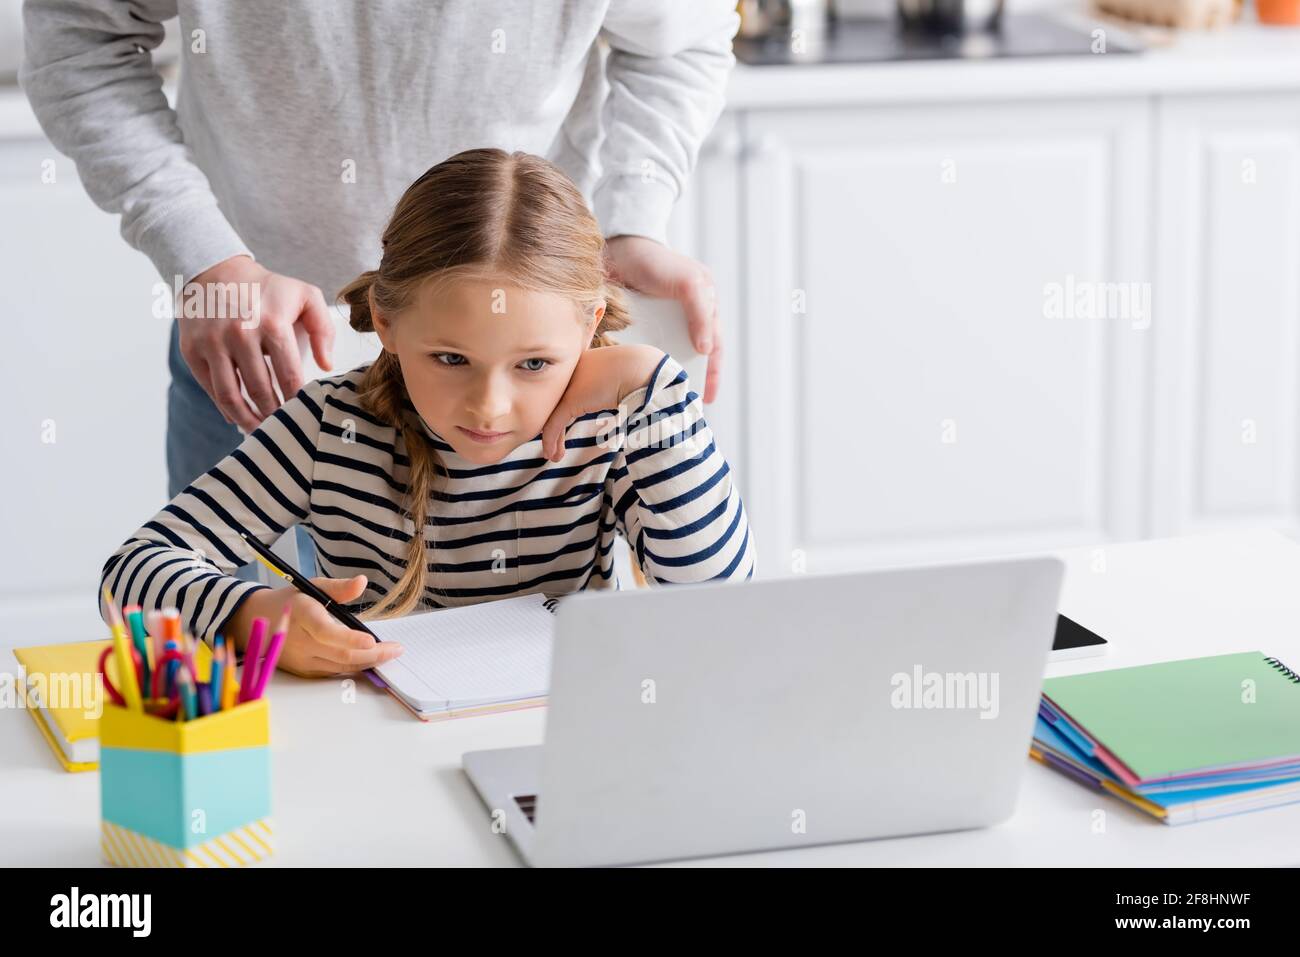 father standing behind schoolgirl looking at laptop during online lesson, blurred foreground Stock Photo